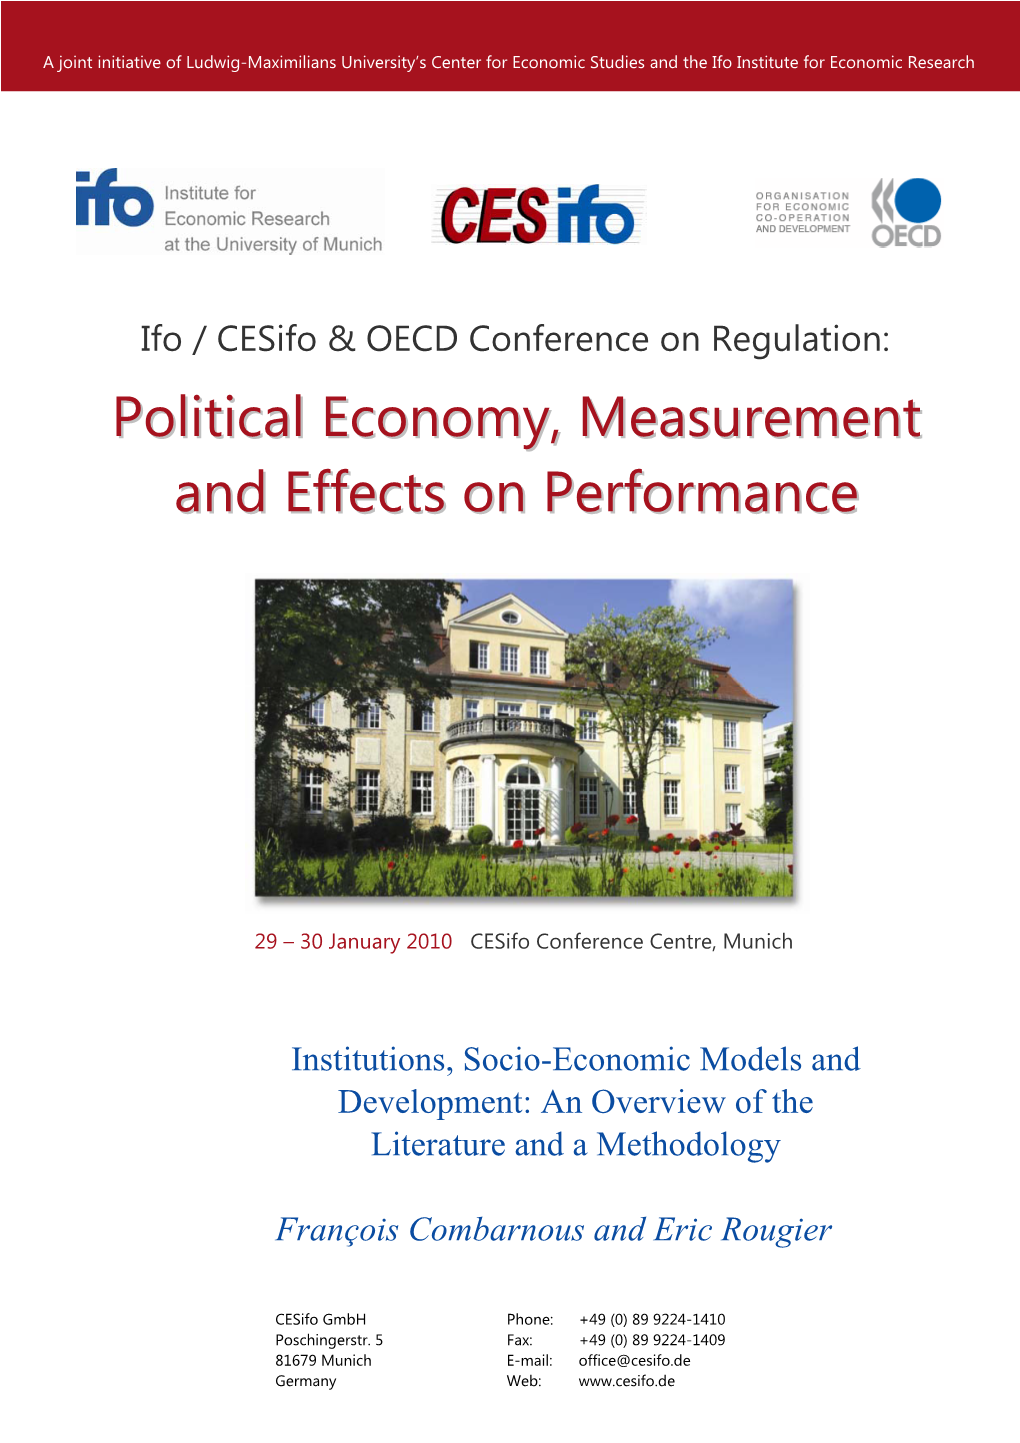 Political Economy, Measurement and Effects on Performance